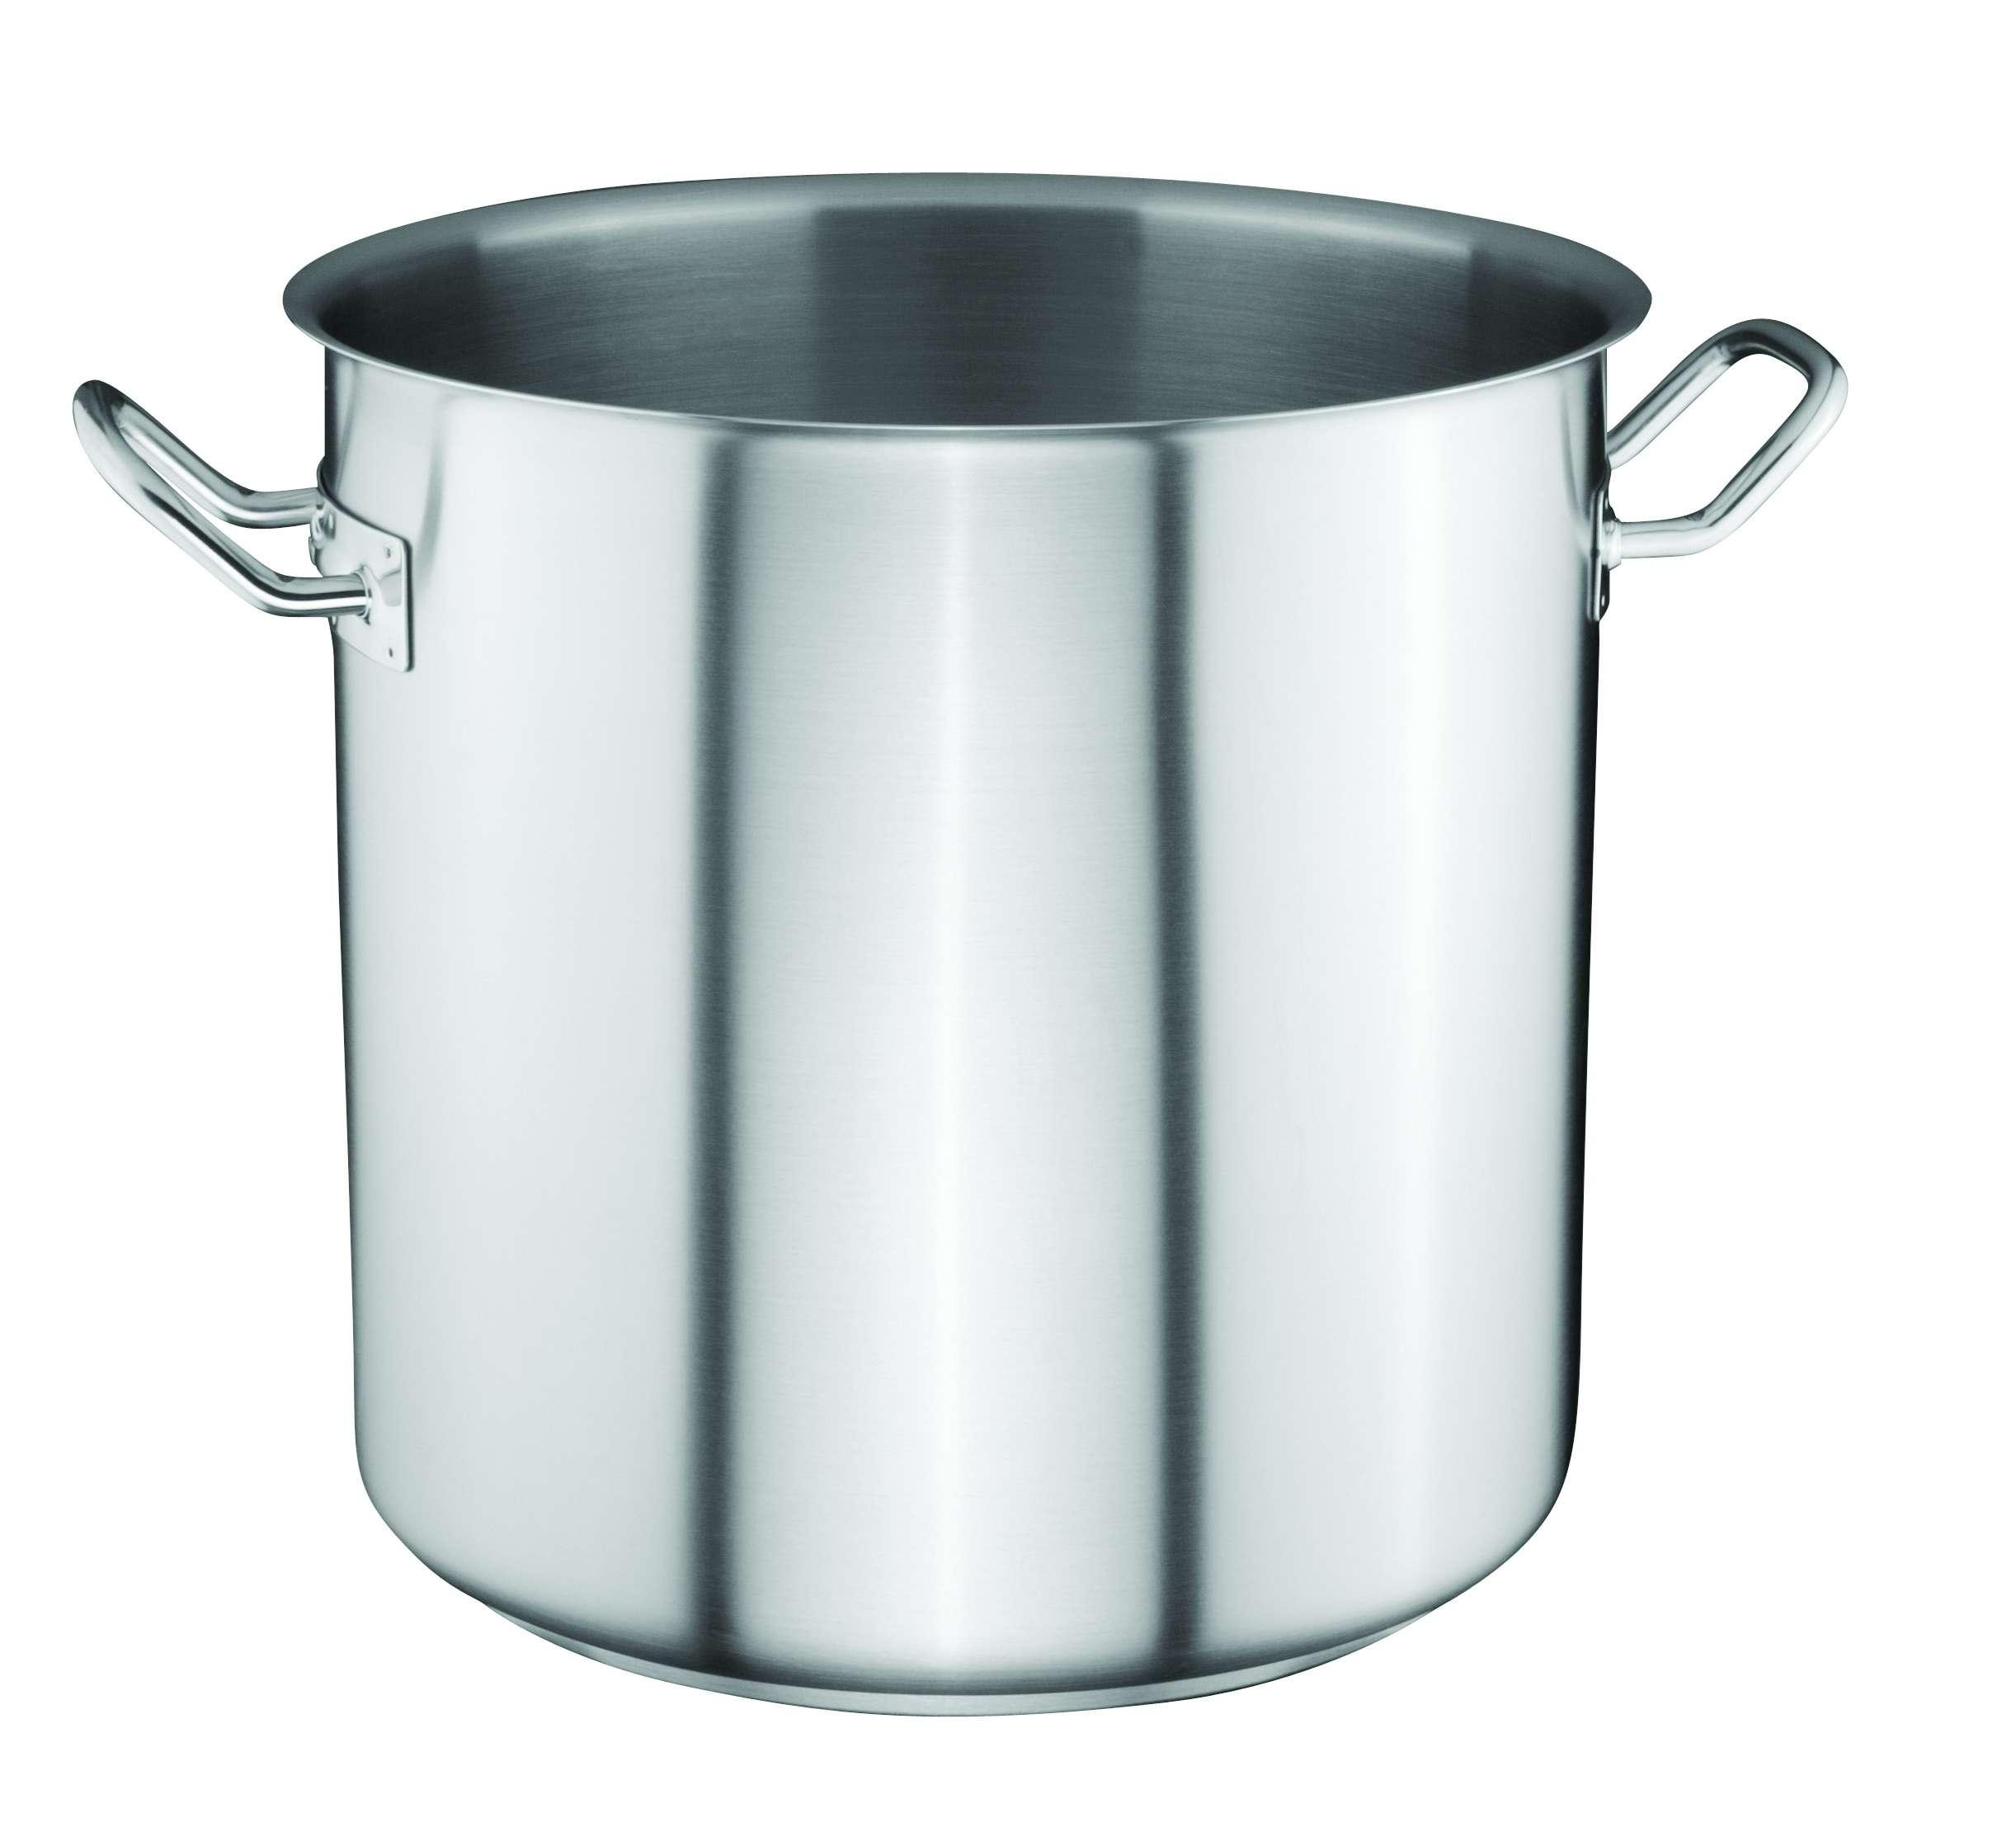 Ozti Stainless Steel Stock Pot 32 cm x 27.5 cm Silver Stainless Steel